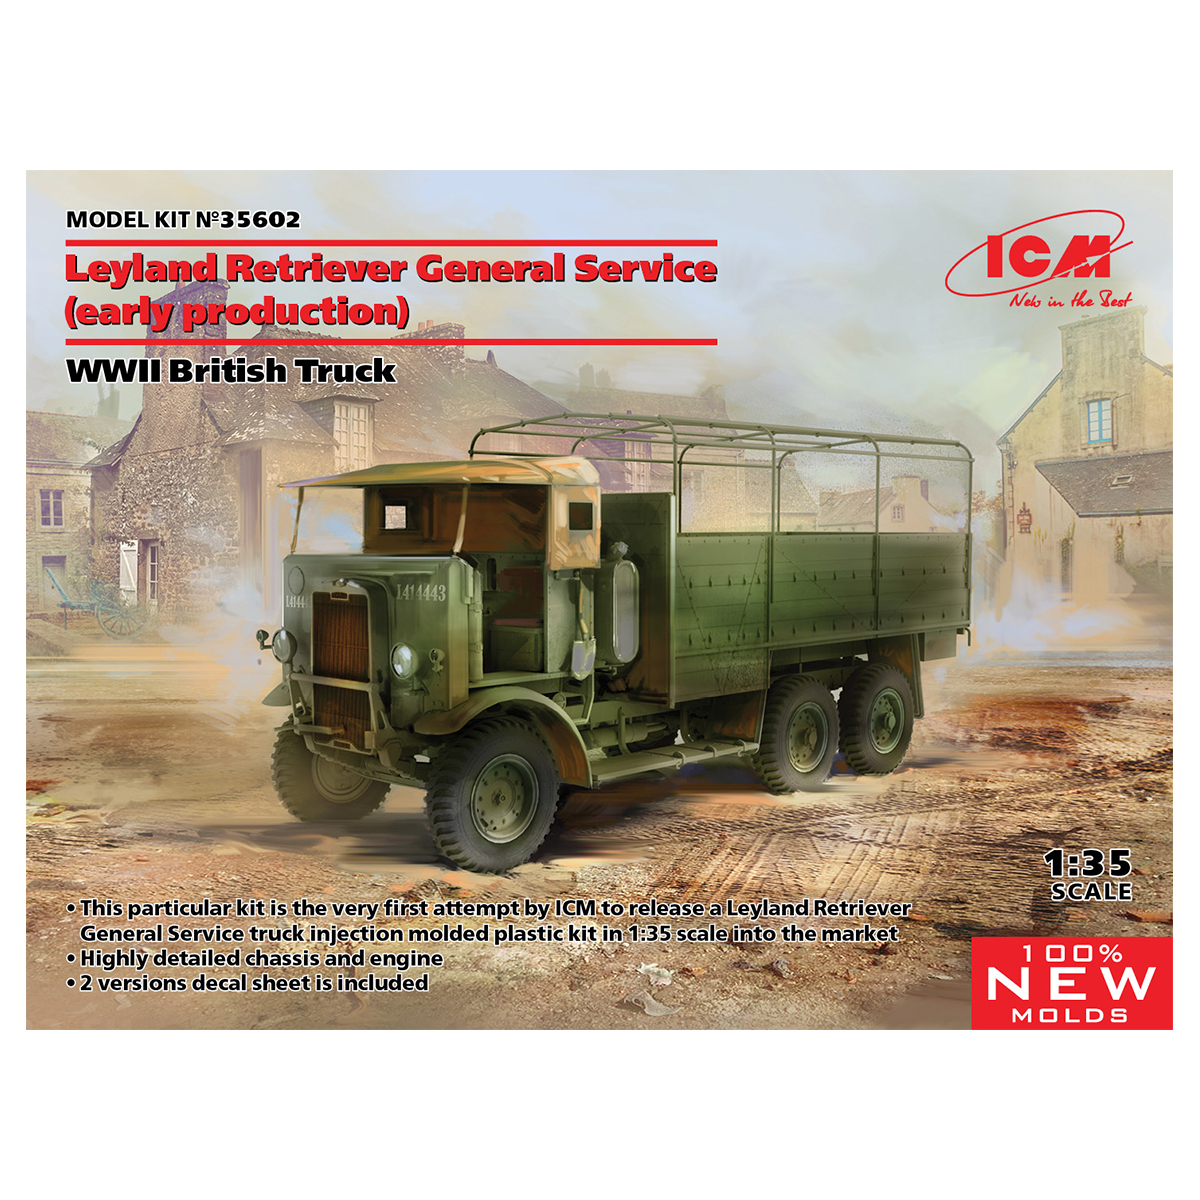 Leyland Retriever General Service (early production), WWII British Truck 1/35